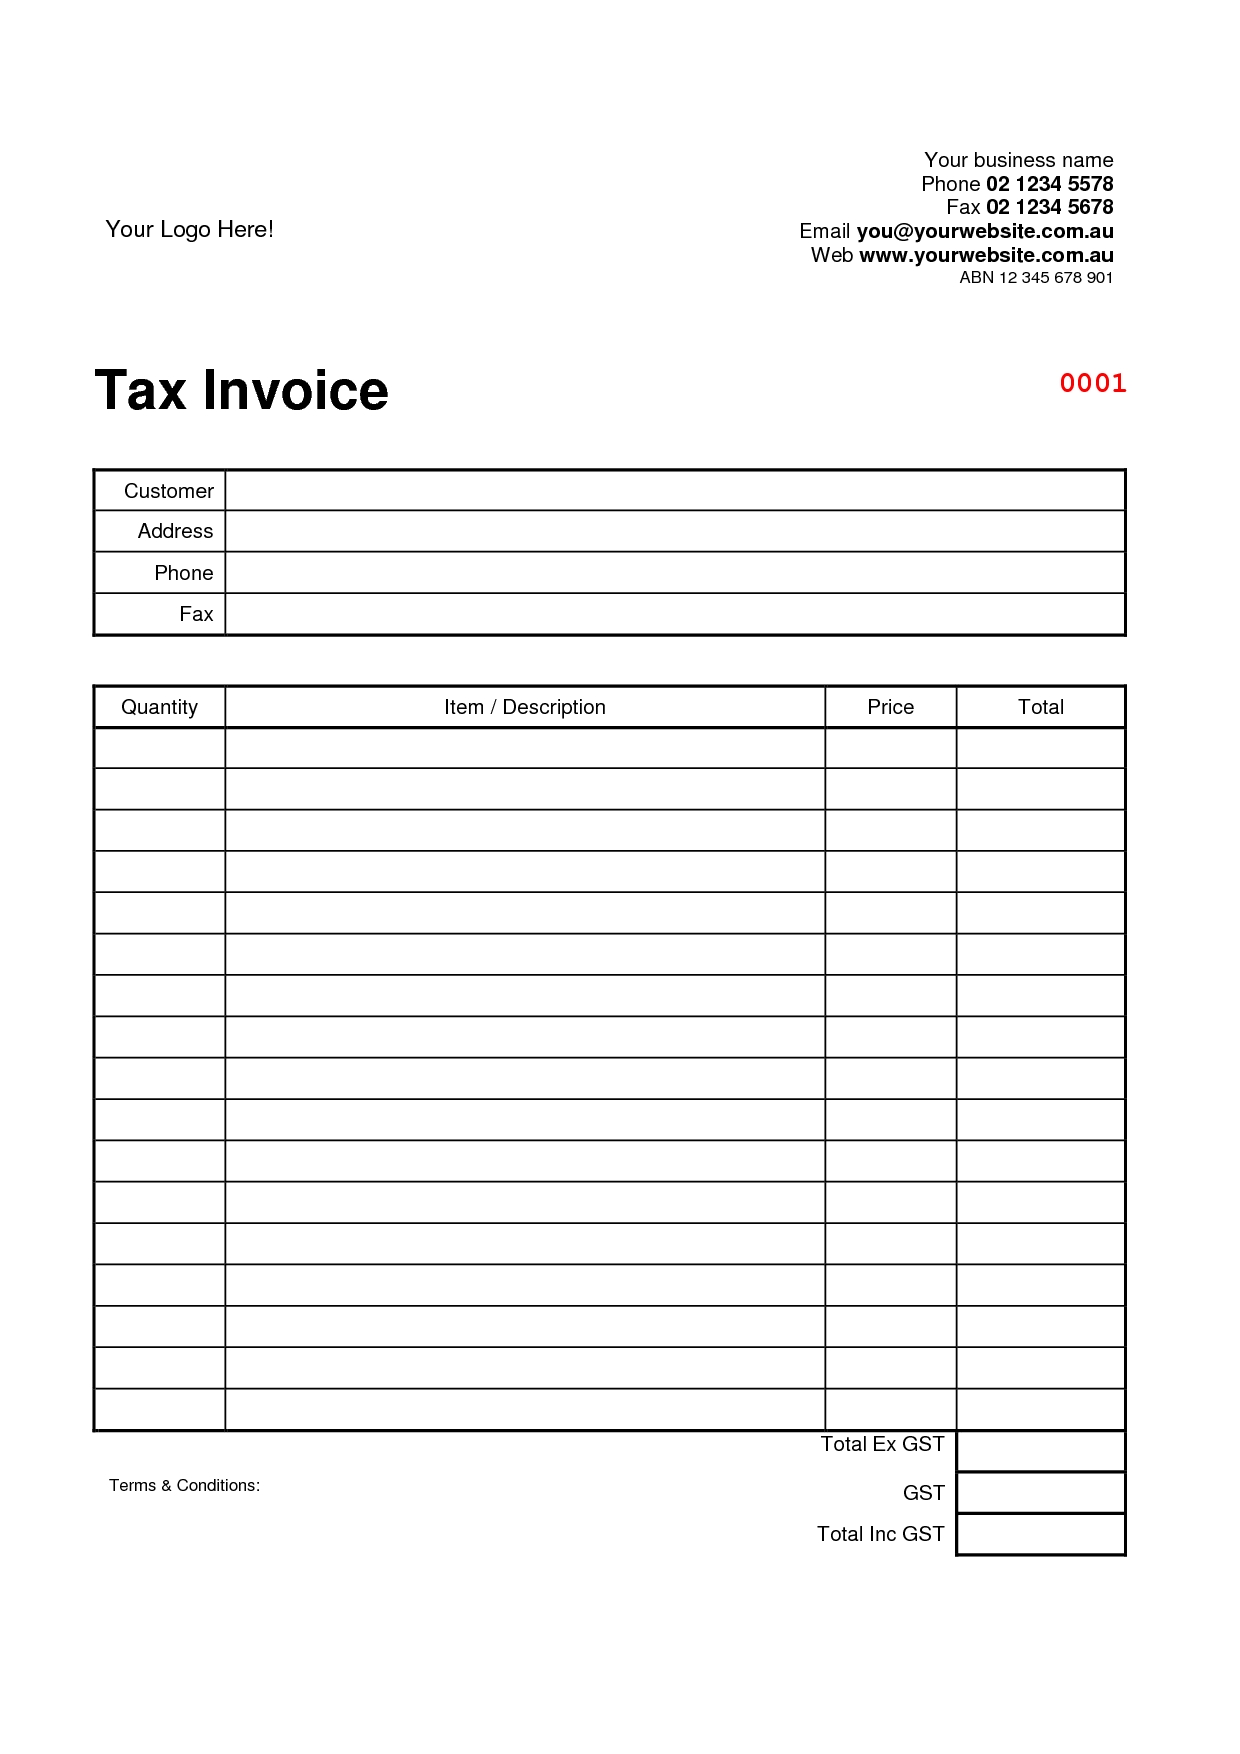 photo tax invoice format in word images sample tax invoice excel